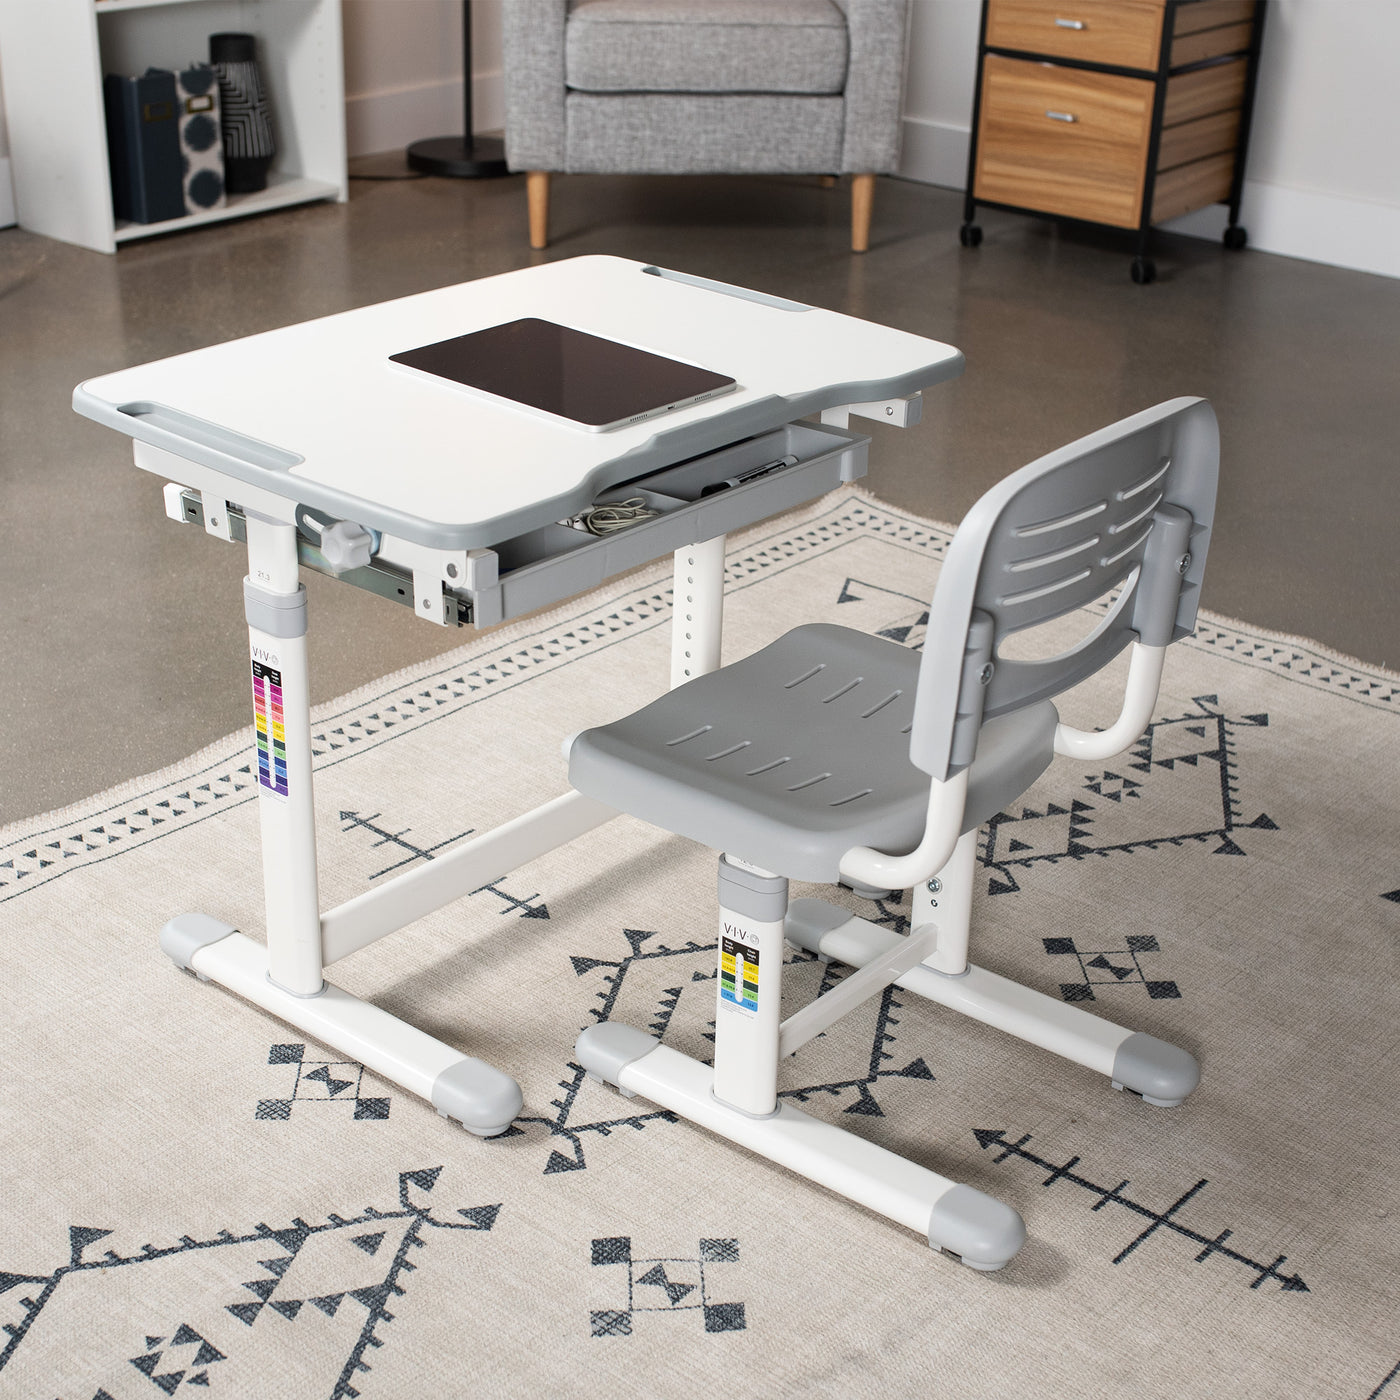 Interactive children's desk and chair station for at-home spaces or classrooms.